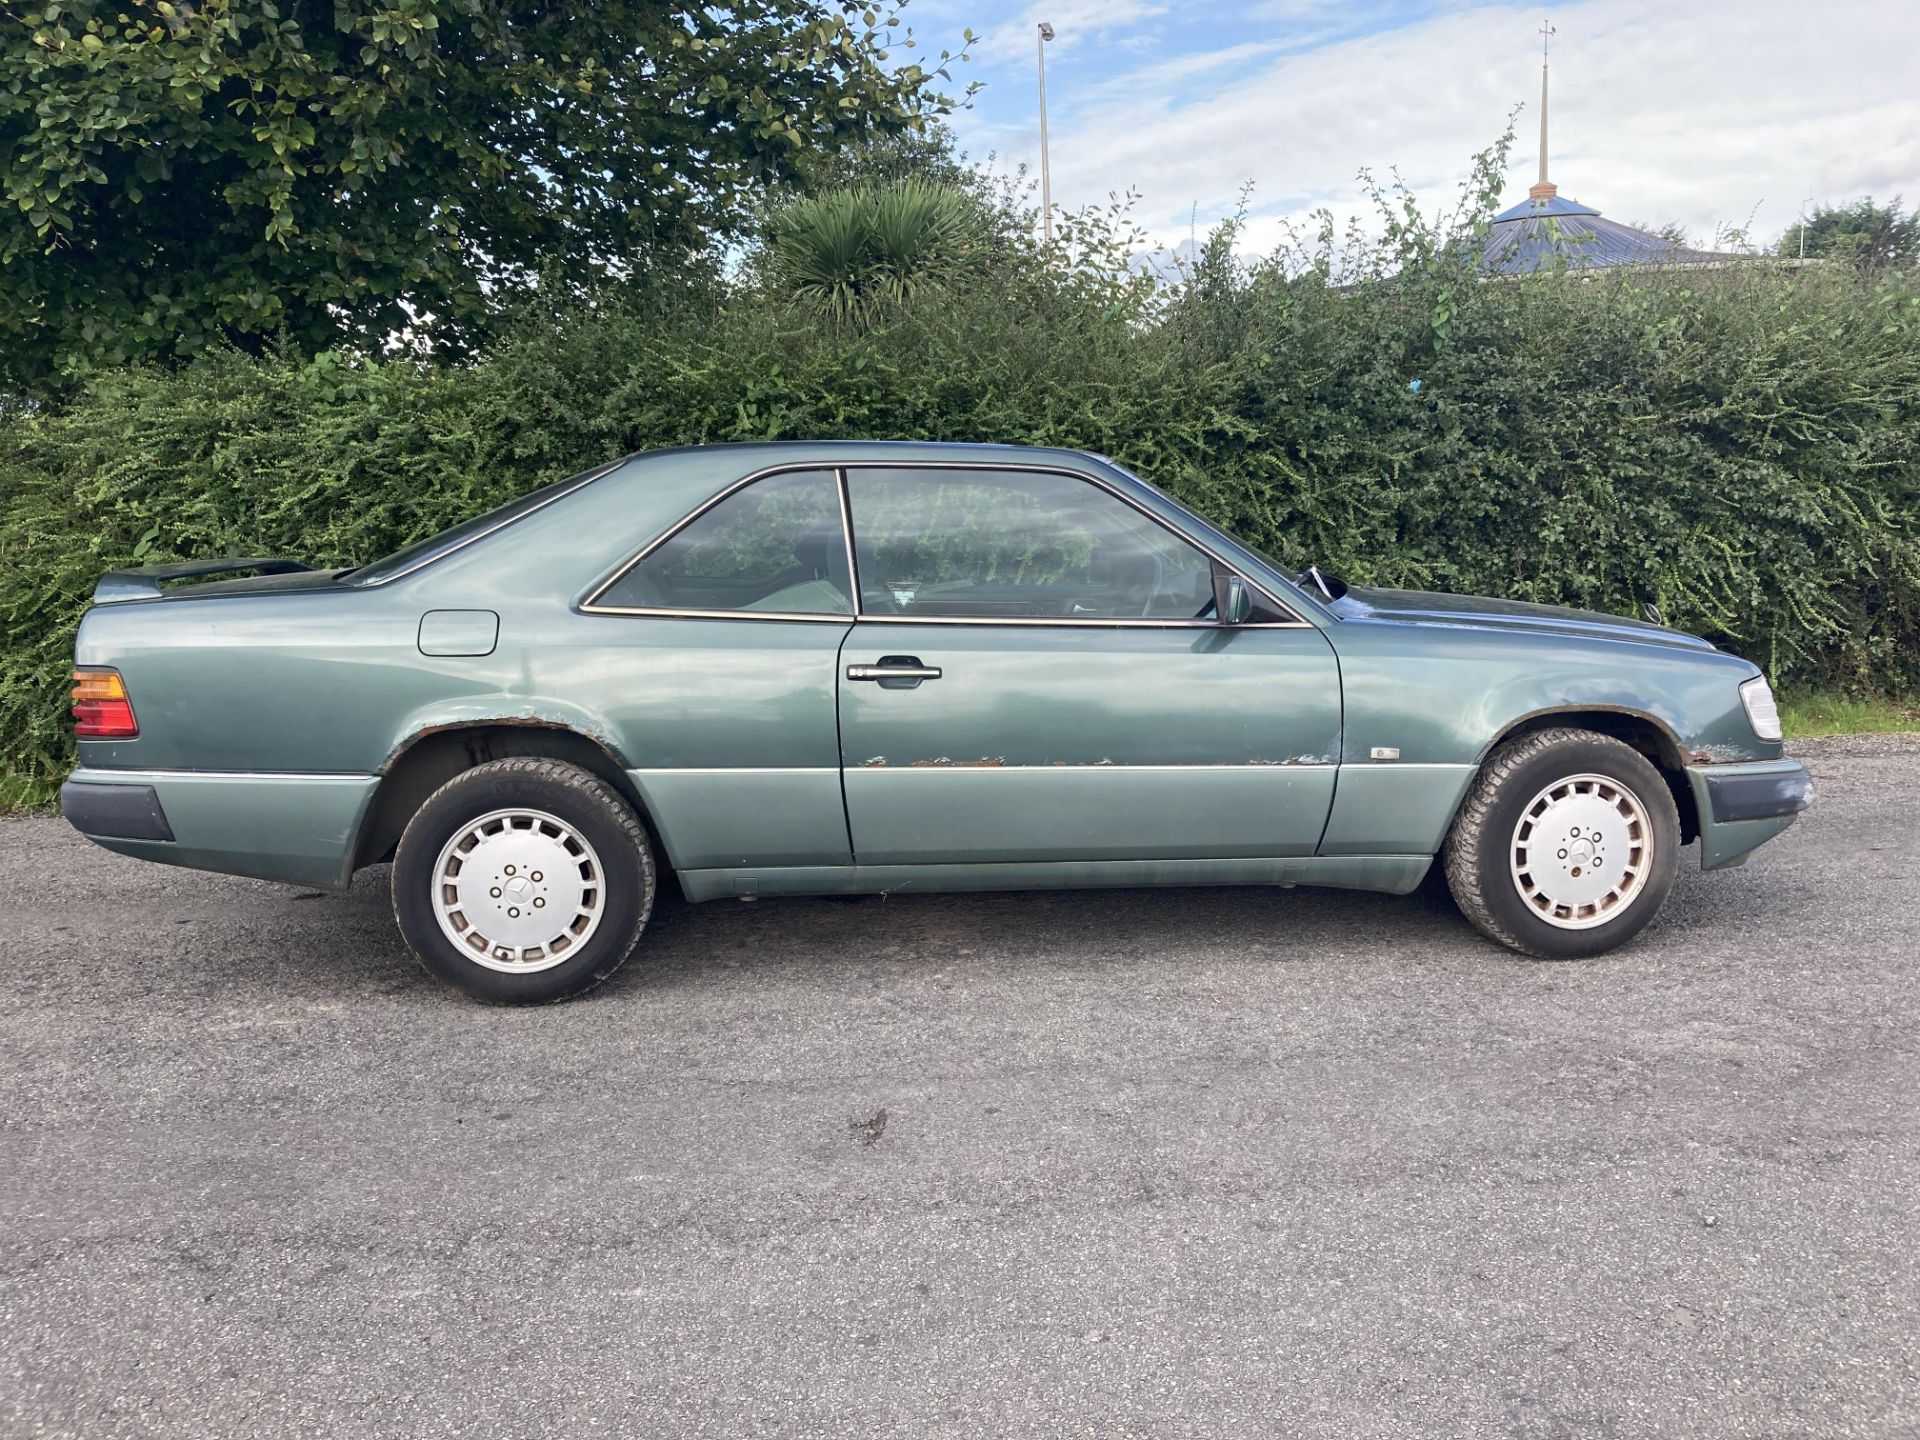 1992 MERCEDES 230E CLASSIC COUPE LOW RESERVE .LOCATION NORTHERN IRELAND.